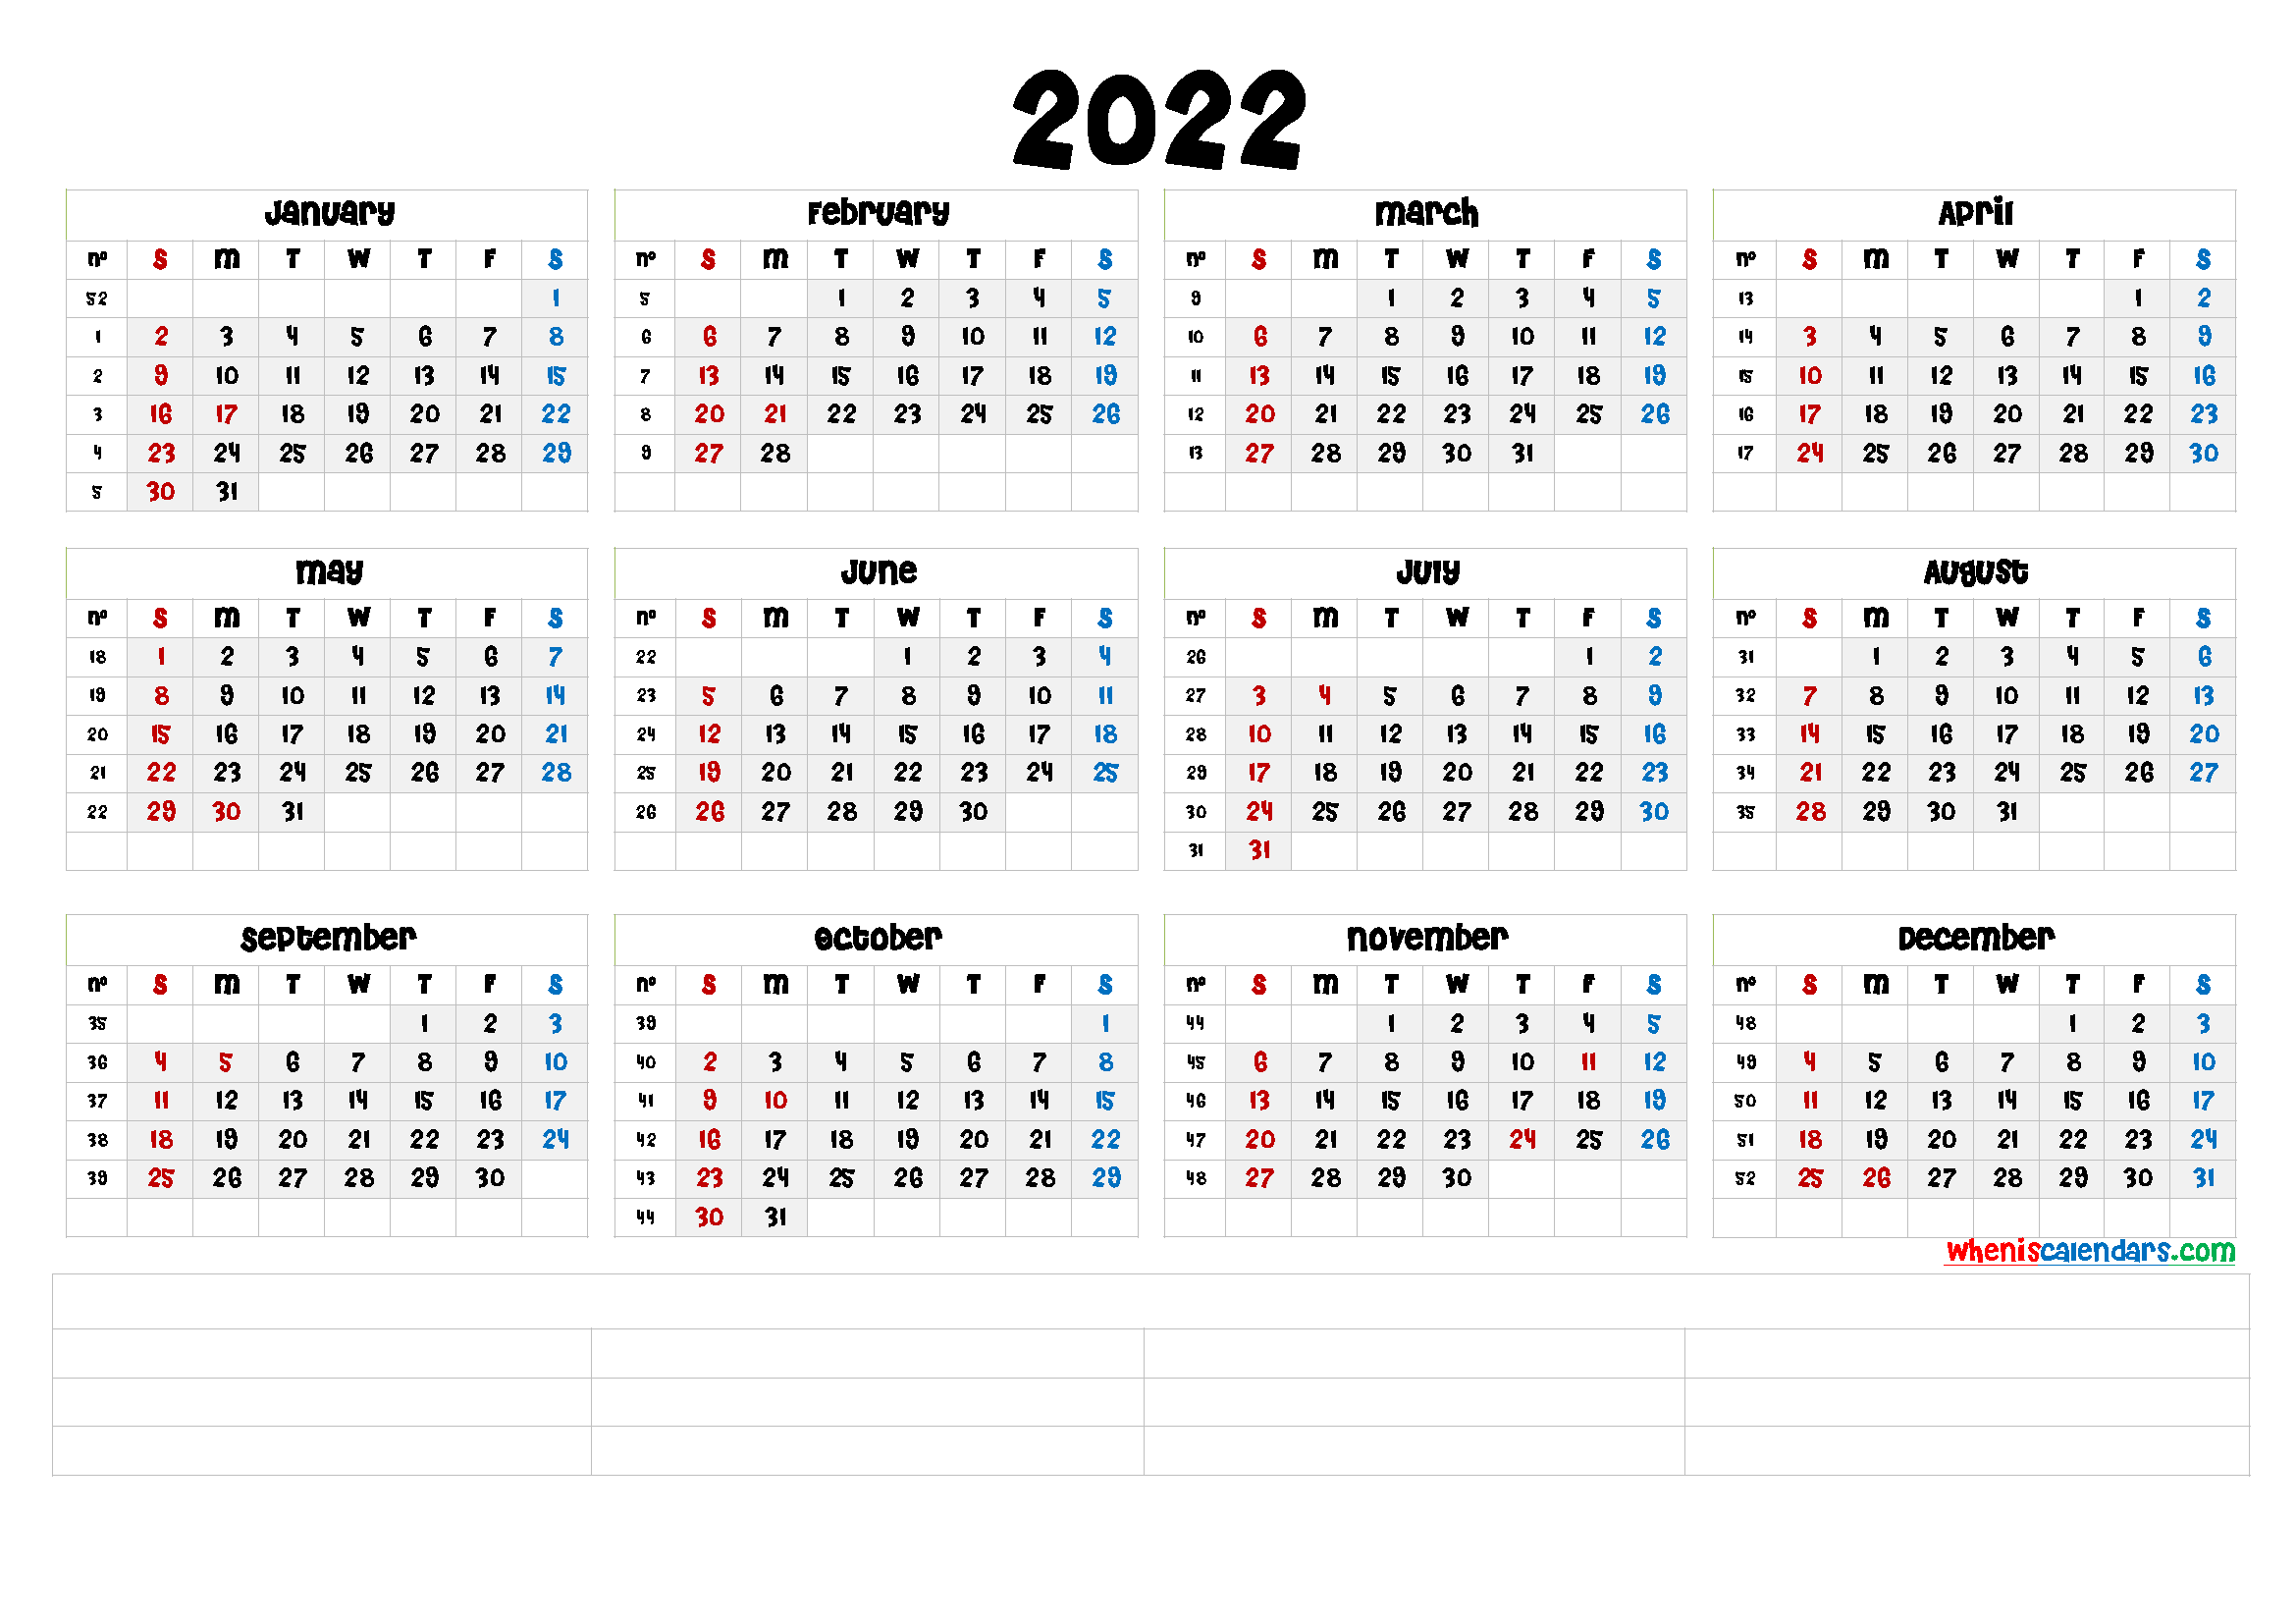 Free Printable 2022 Calendar by Month (6 Templates) - Free ...